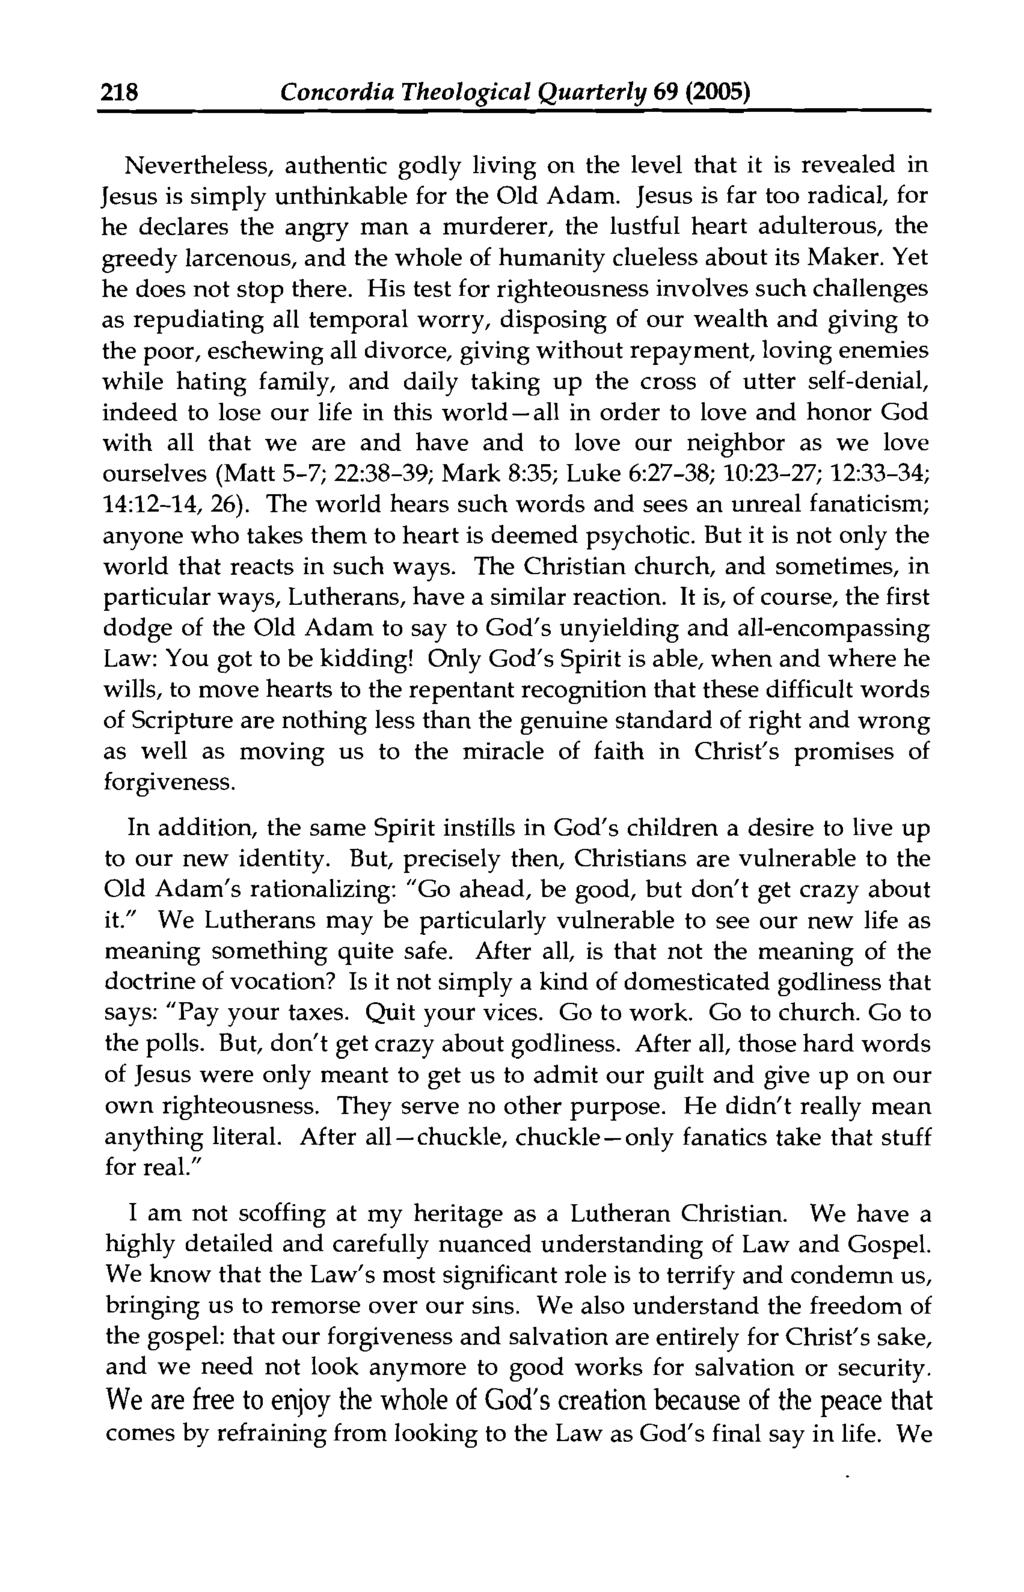 218 Concordia Theological Quarterly 69 (2005) Nevertheless, authentic godly living on the level that it is revealed in Jesus is simply unthinkable for the Old Adam.